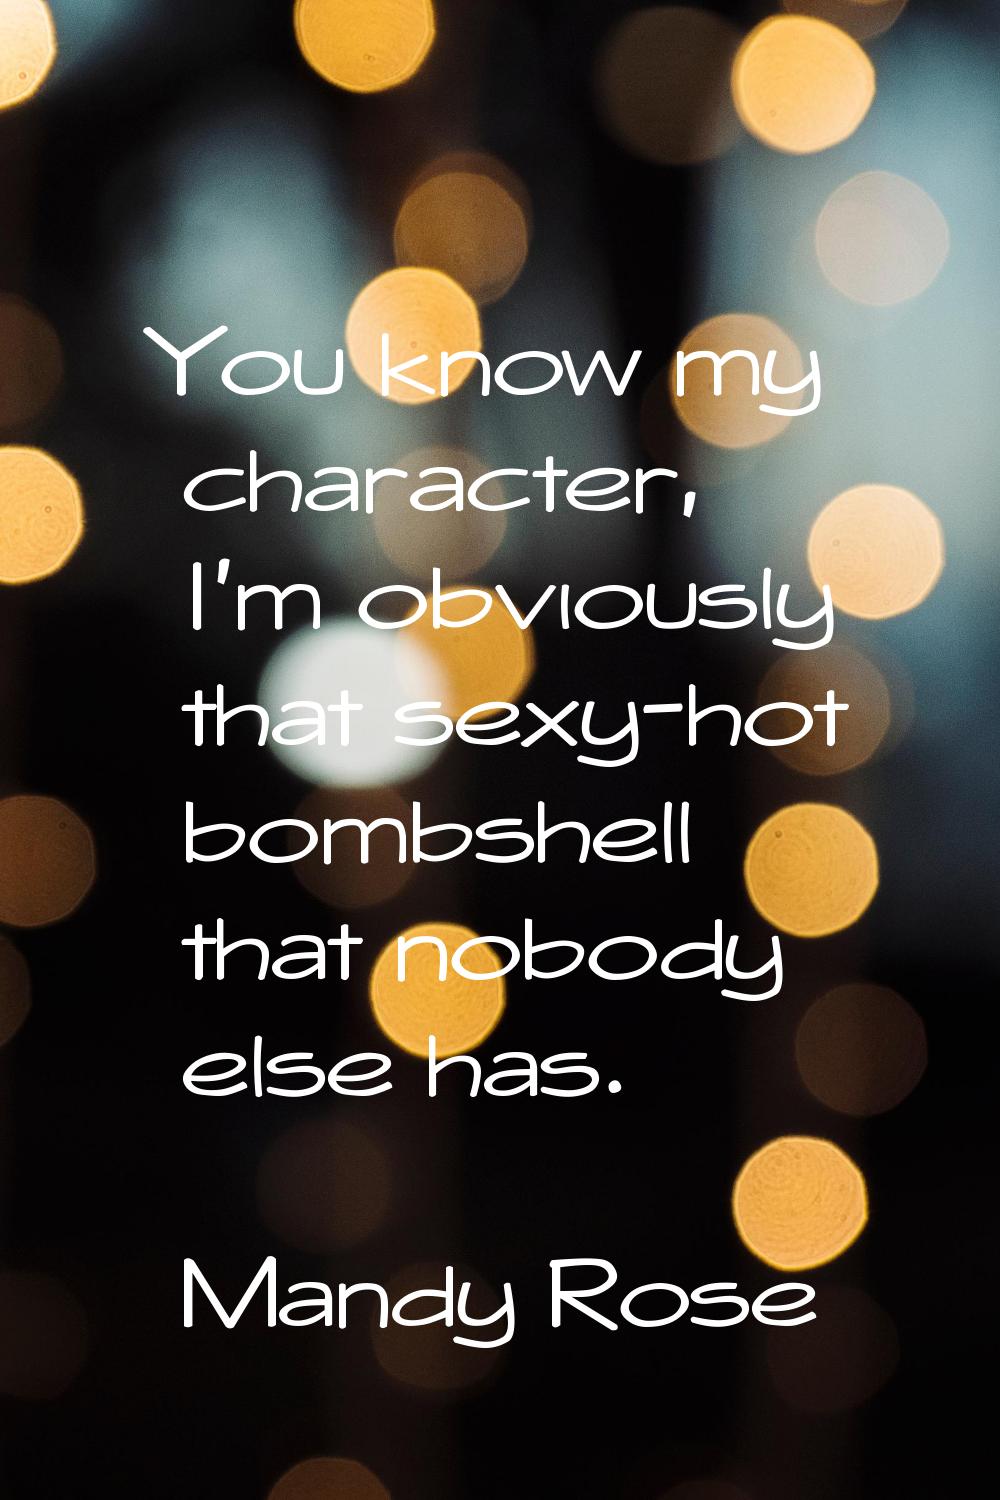 You know my character, I'm obviously that sexy-hot bombshell that nobody else has.